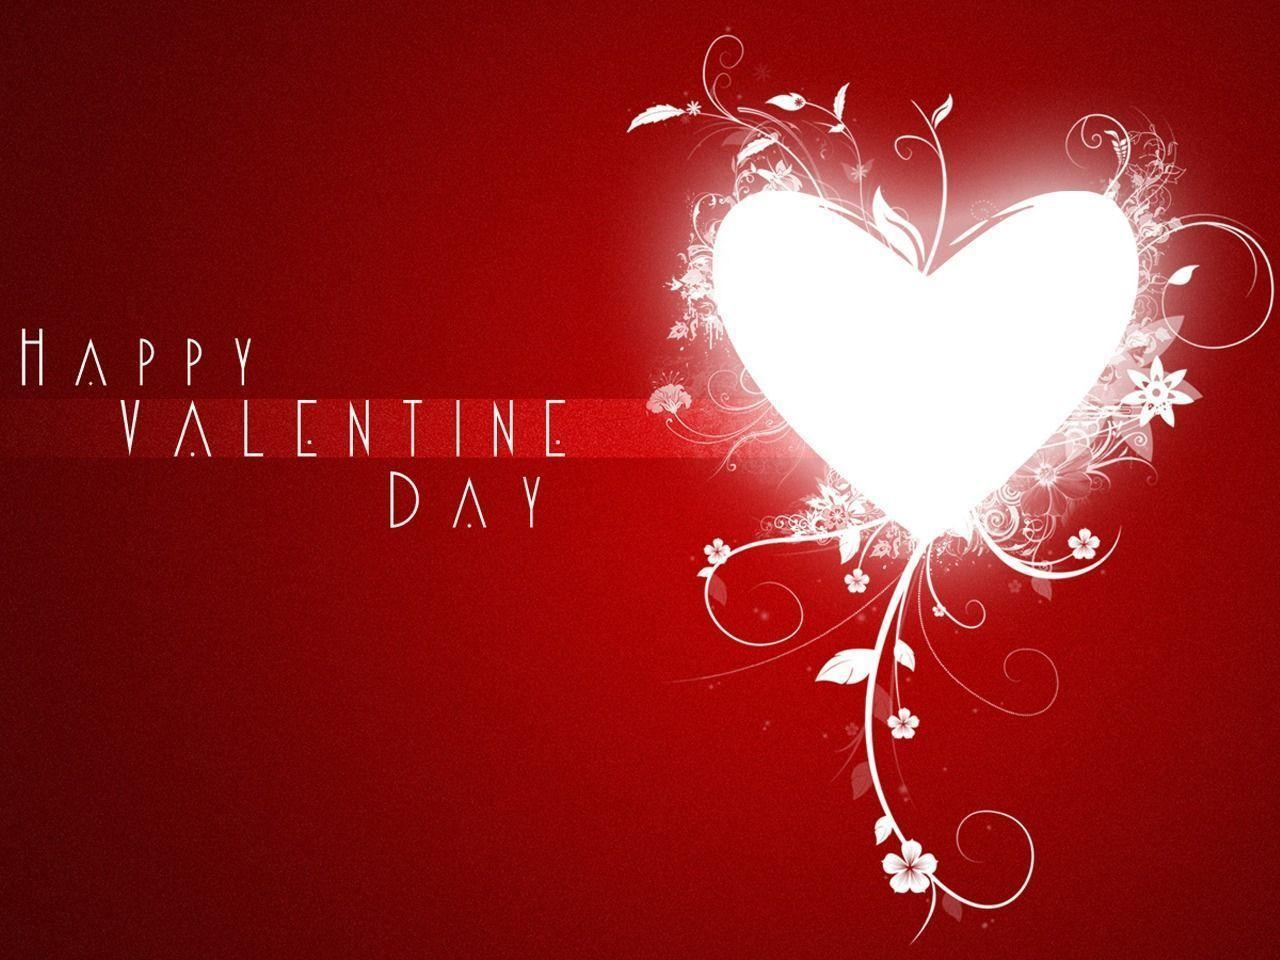 Happy Valentine Day. Home Concepts Ideas